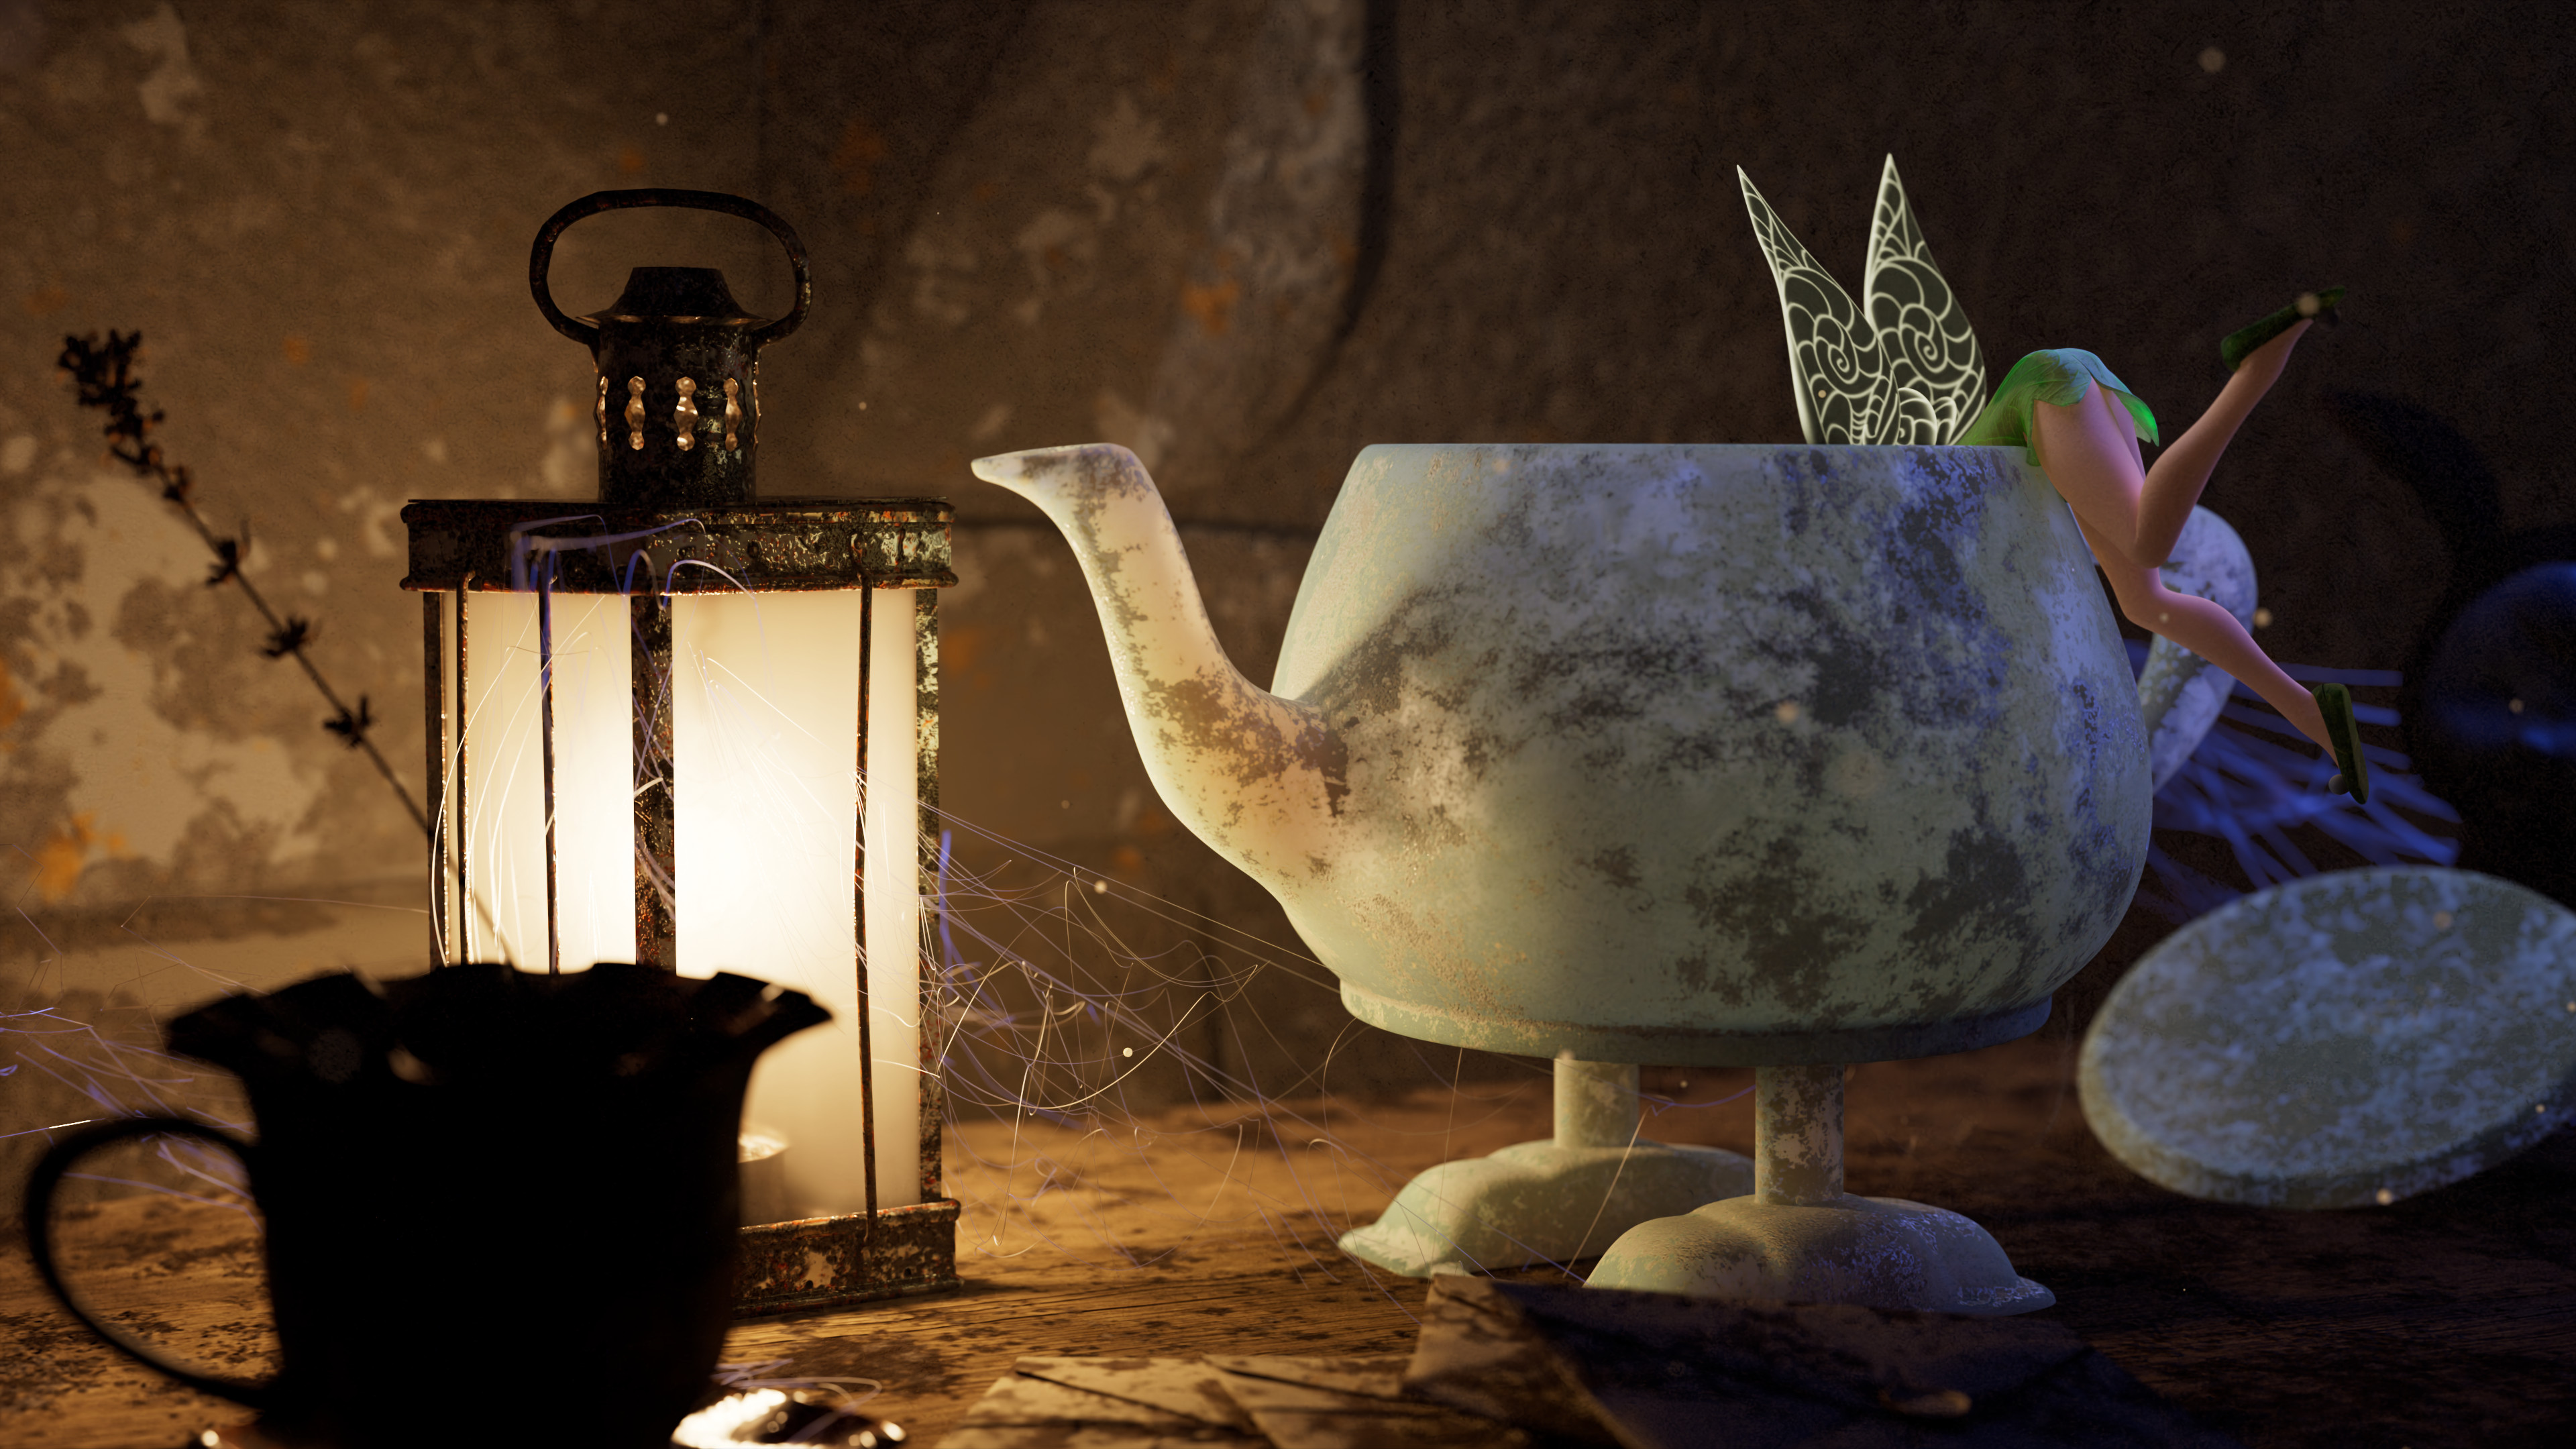 Whats in the teapot?